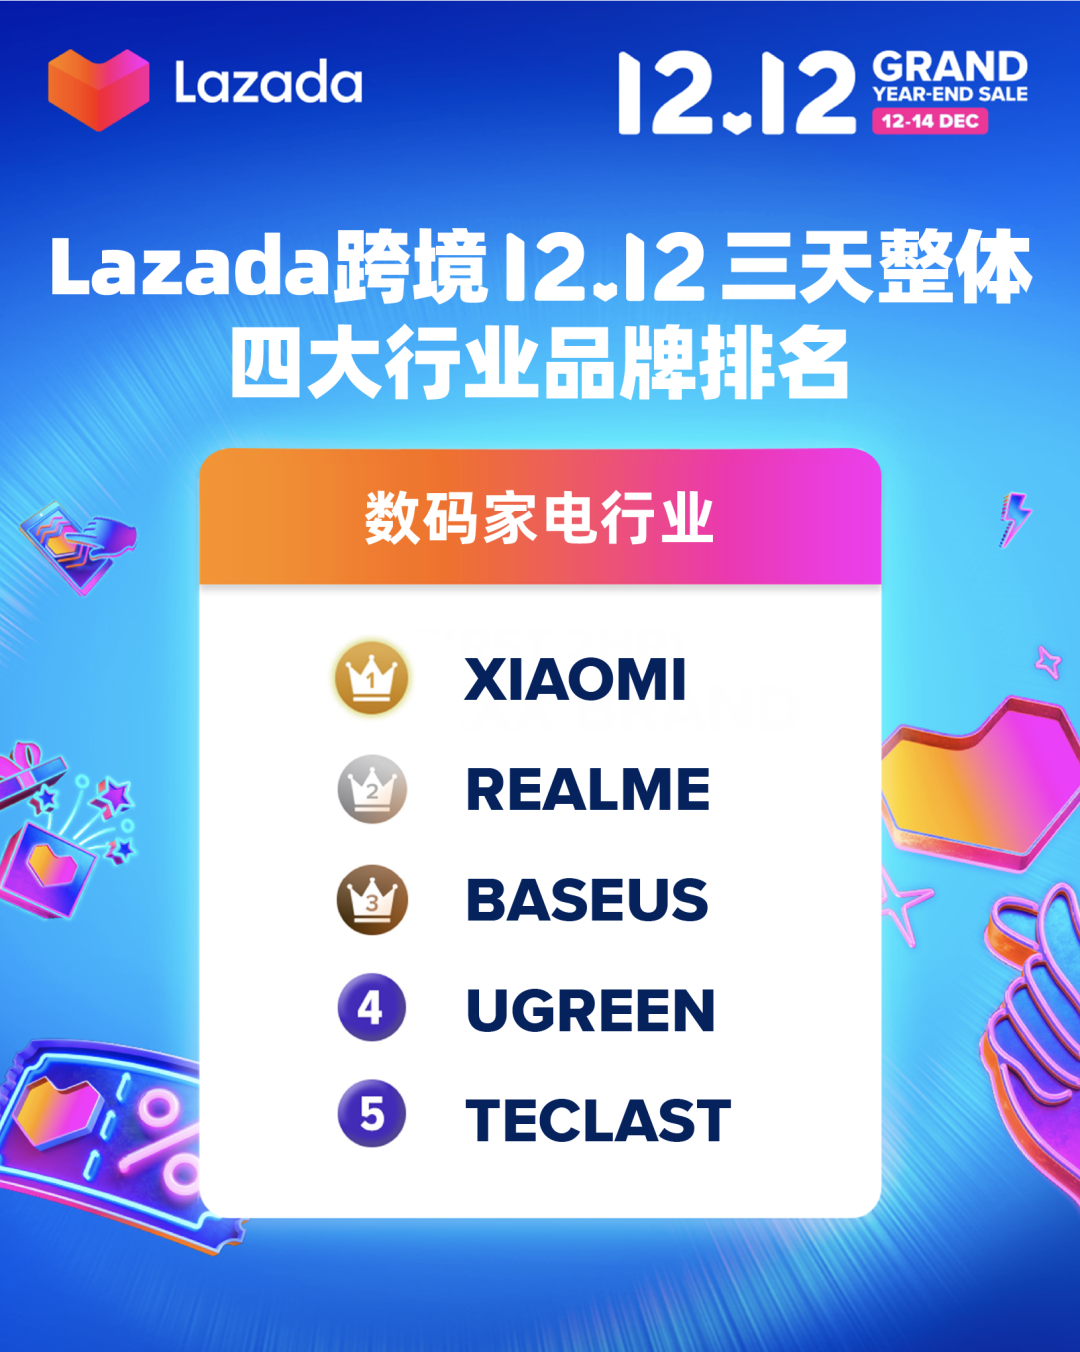 Cross border information Lazada 12.12 is the most comprehensive report. This is enough!